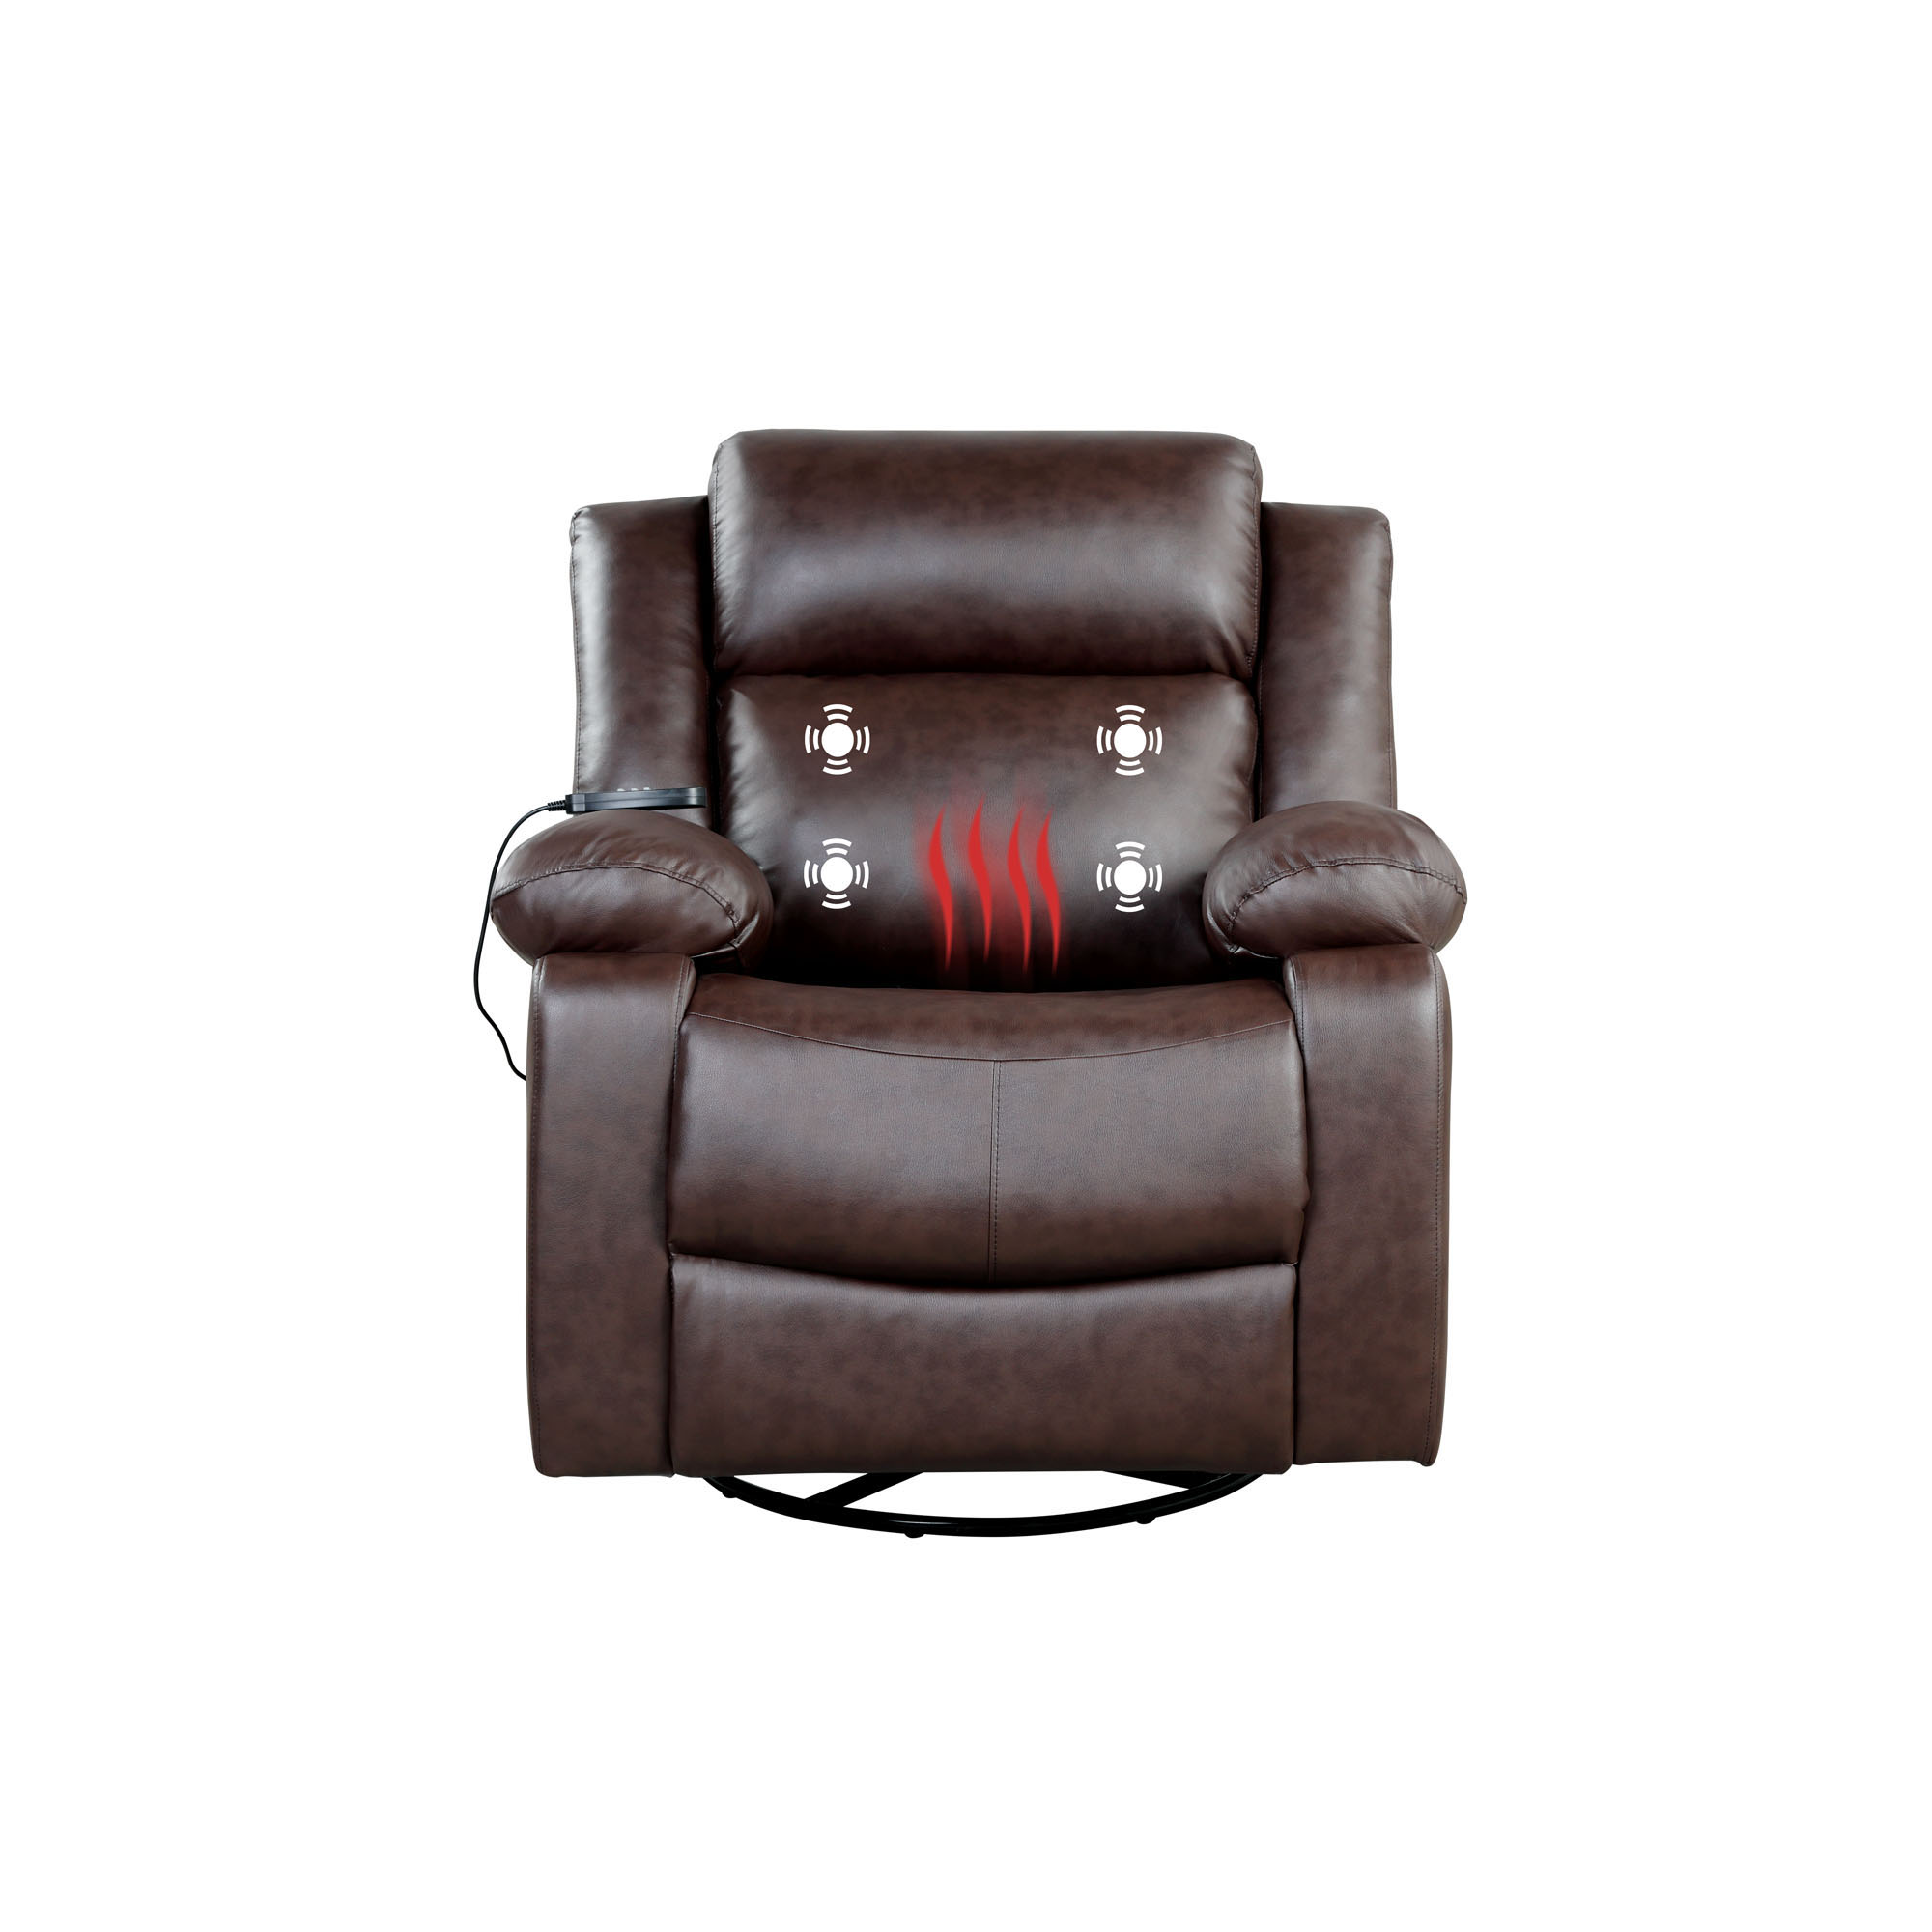 Elm & Oak Maxima Standard Manual Swivel Recliner with Massage and Heat, Brown Faux Leather - image 5 of 13